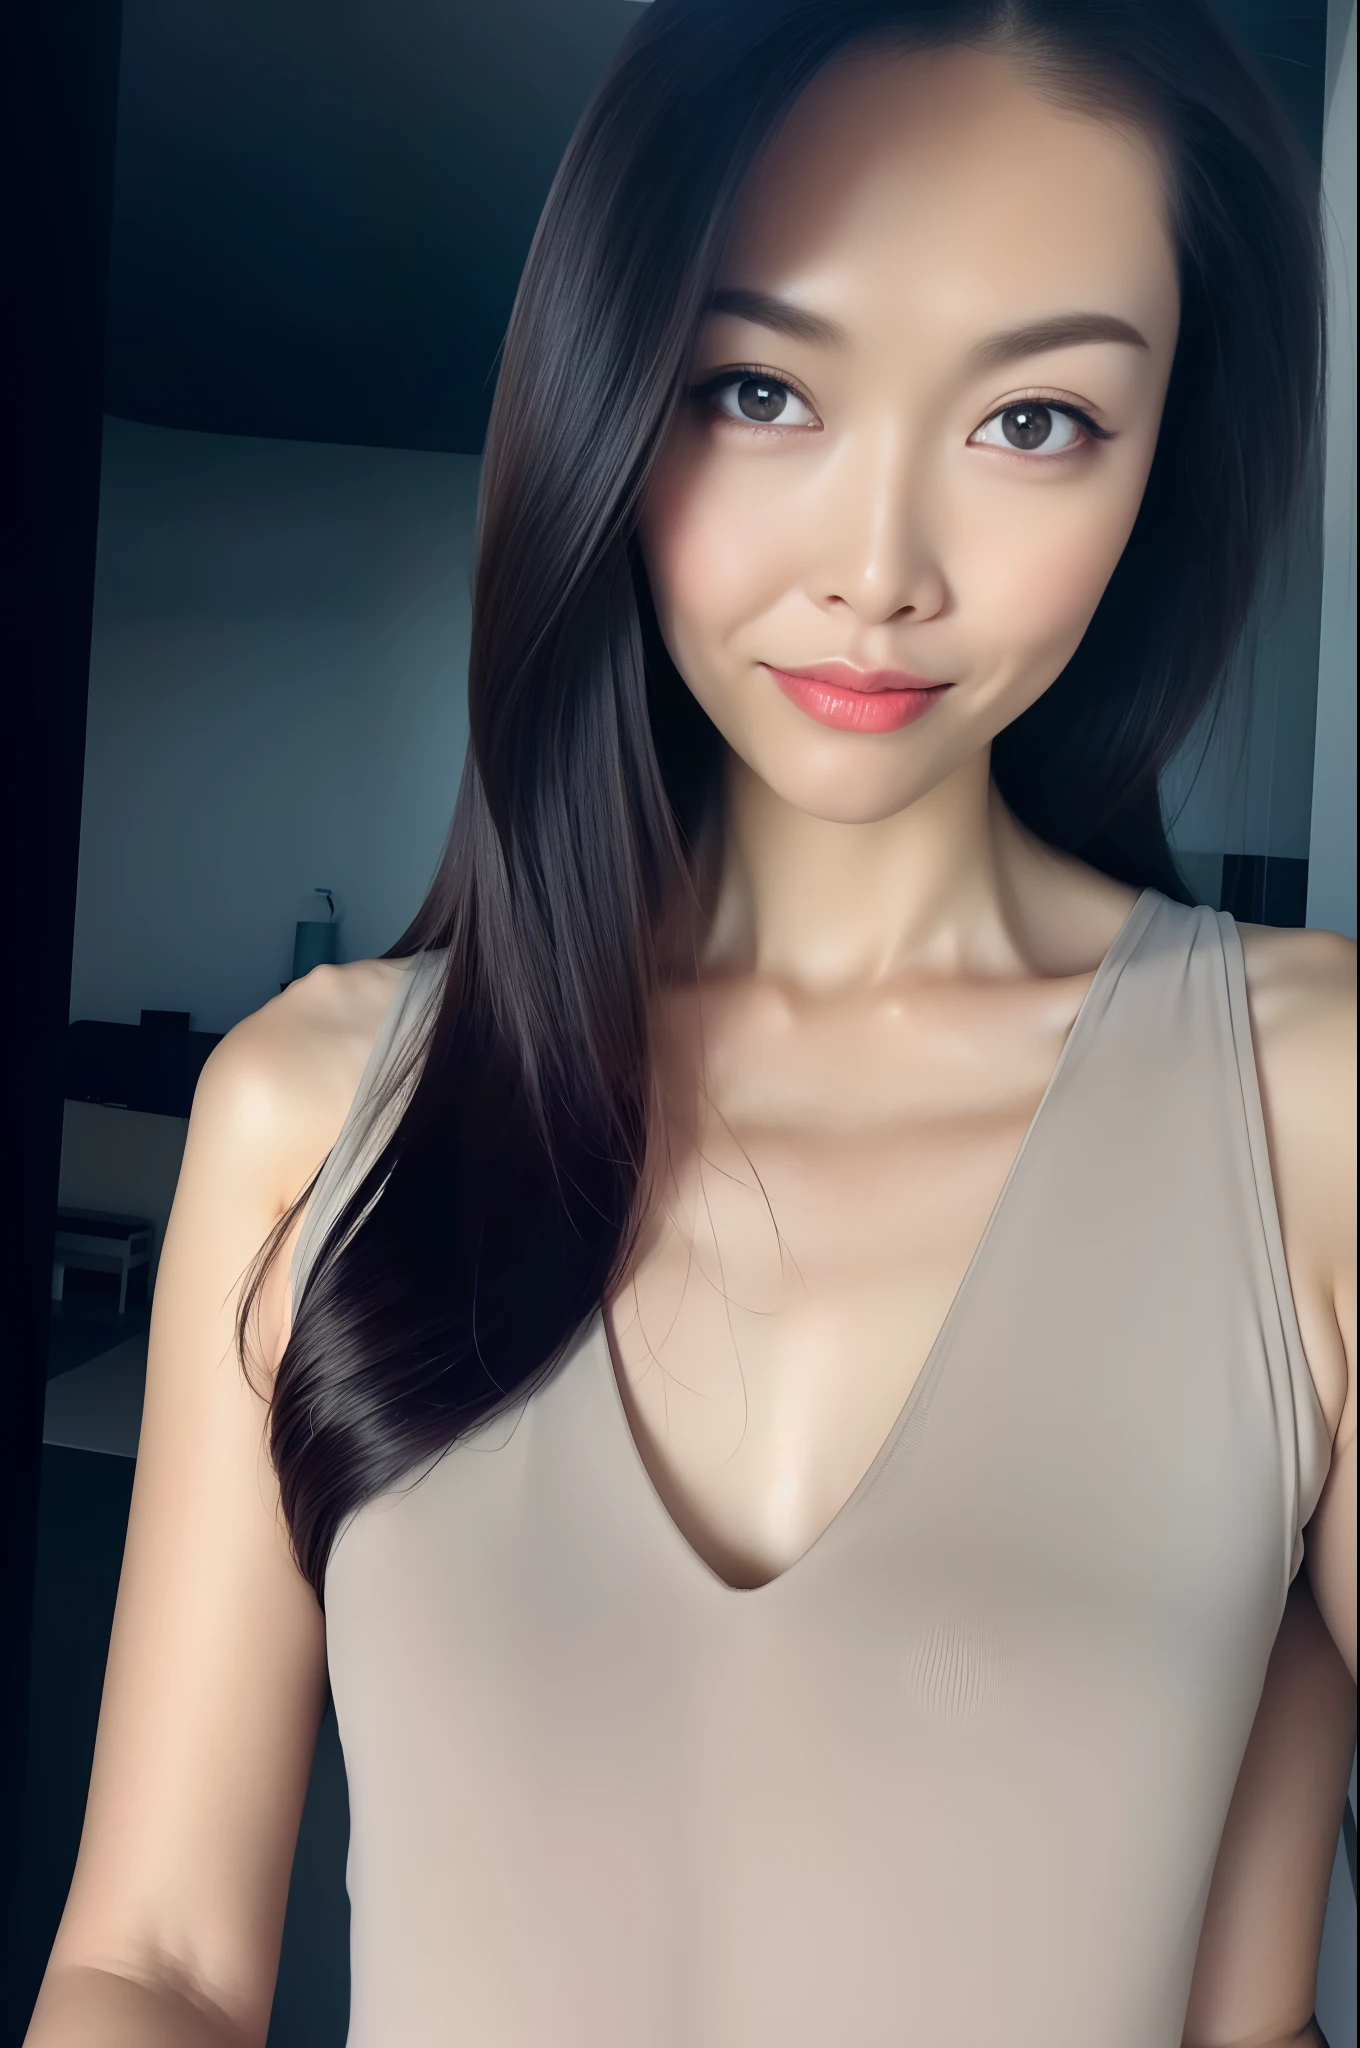 Beautiful asian girl with red lips, Her eyes shone like dreamy stars, glowing eyes, beautiful and detailed eyes, RAW photo,(high detailed skin:1), (realistic, photo-realistic:1.37), ultra high res, professional lighting , 8k uhd, dslr , high quality, film grain, Fujifilm XT3, RAW photo,, RAW photo,(high detailed skin:1), (realistic, photo-realistic:1.37), ultra high res, professional lighting , 8k uhd, dslr , high quality, film grain, Fujifilm XT3, RAW photo,